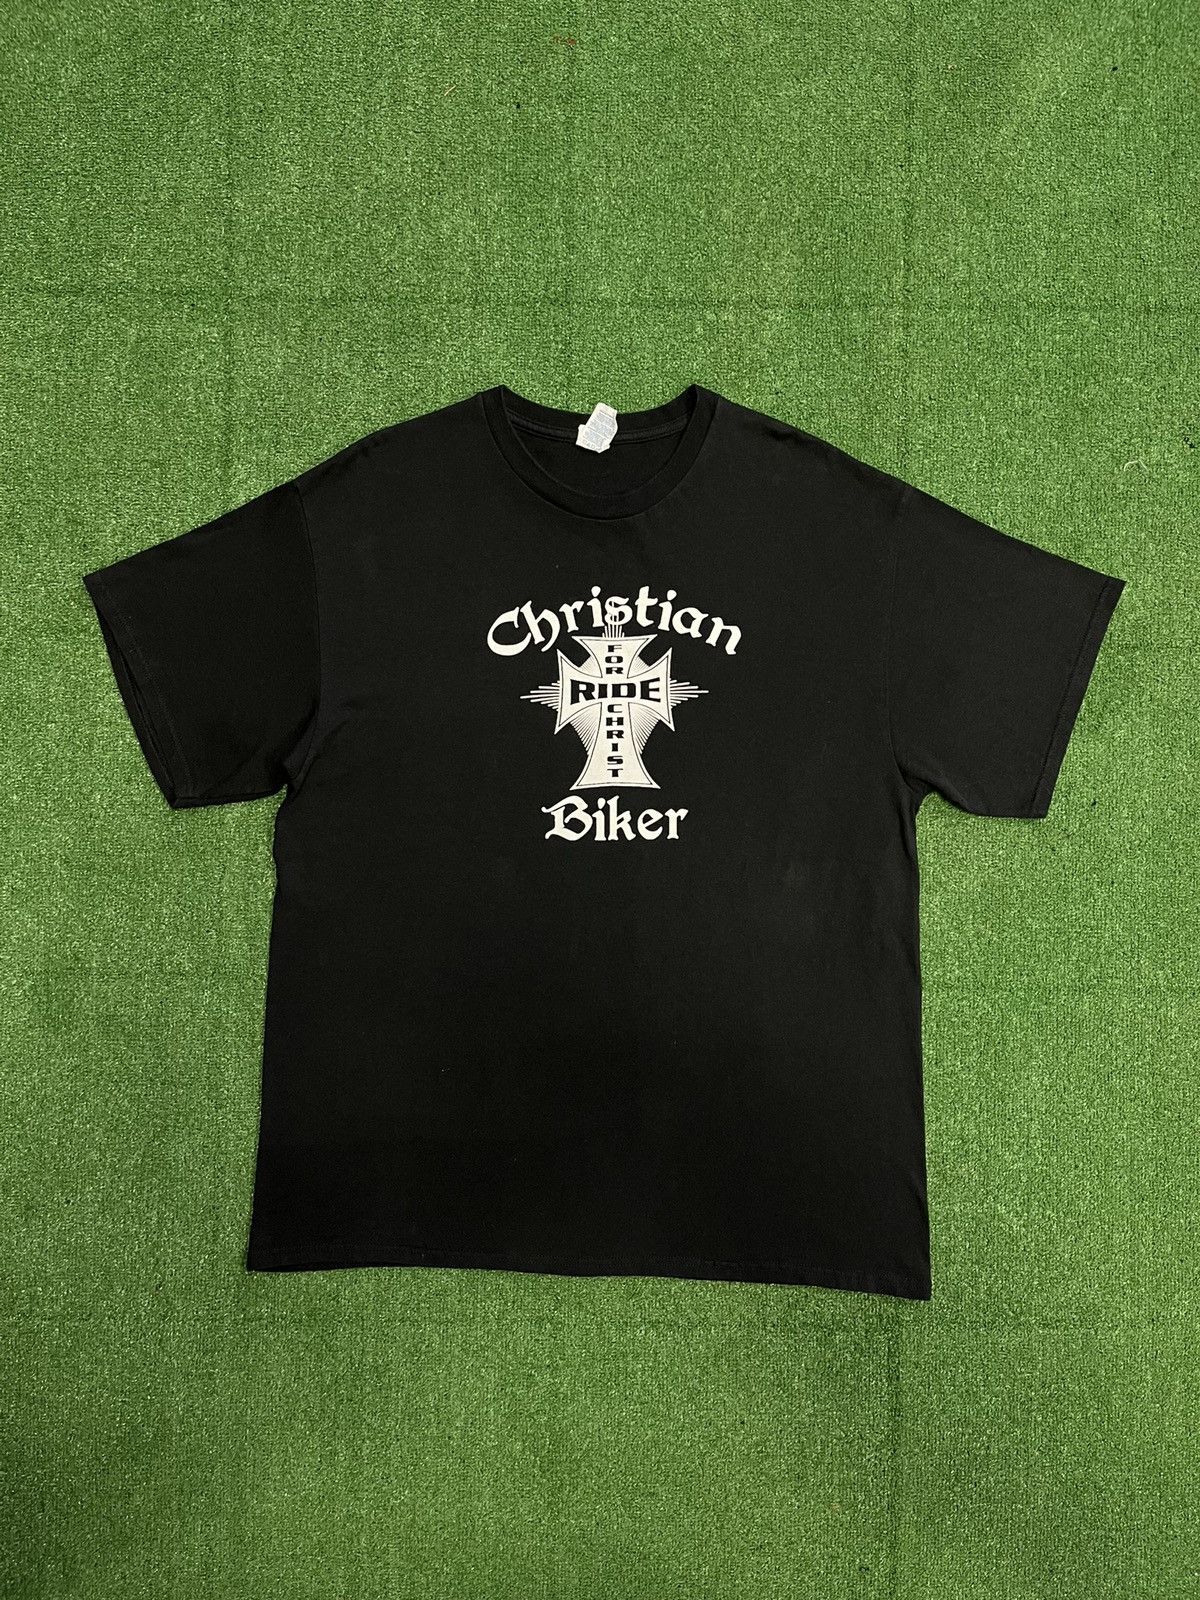 Pre-owned Band Tees X Vintage Christian Biker Ride For Christ Style West Coast Tee In Black